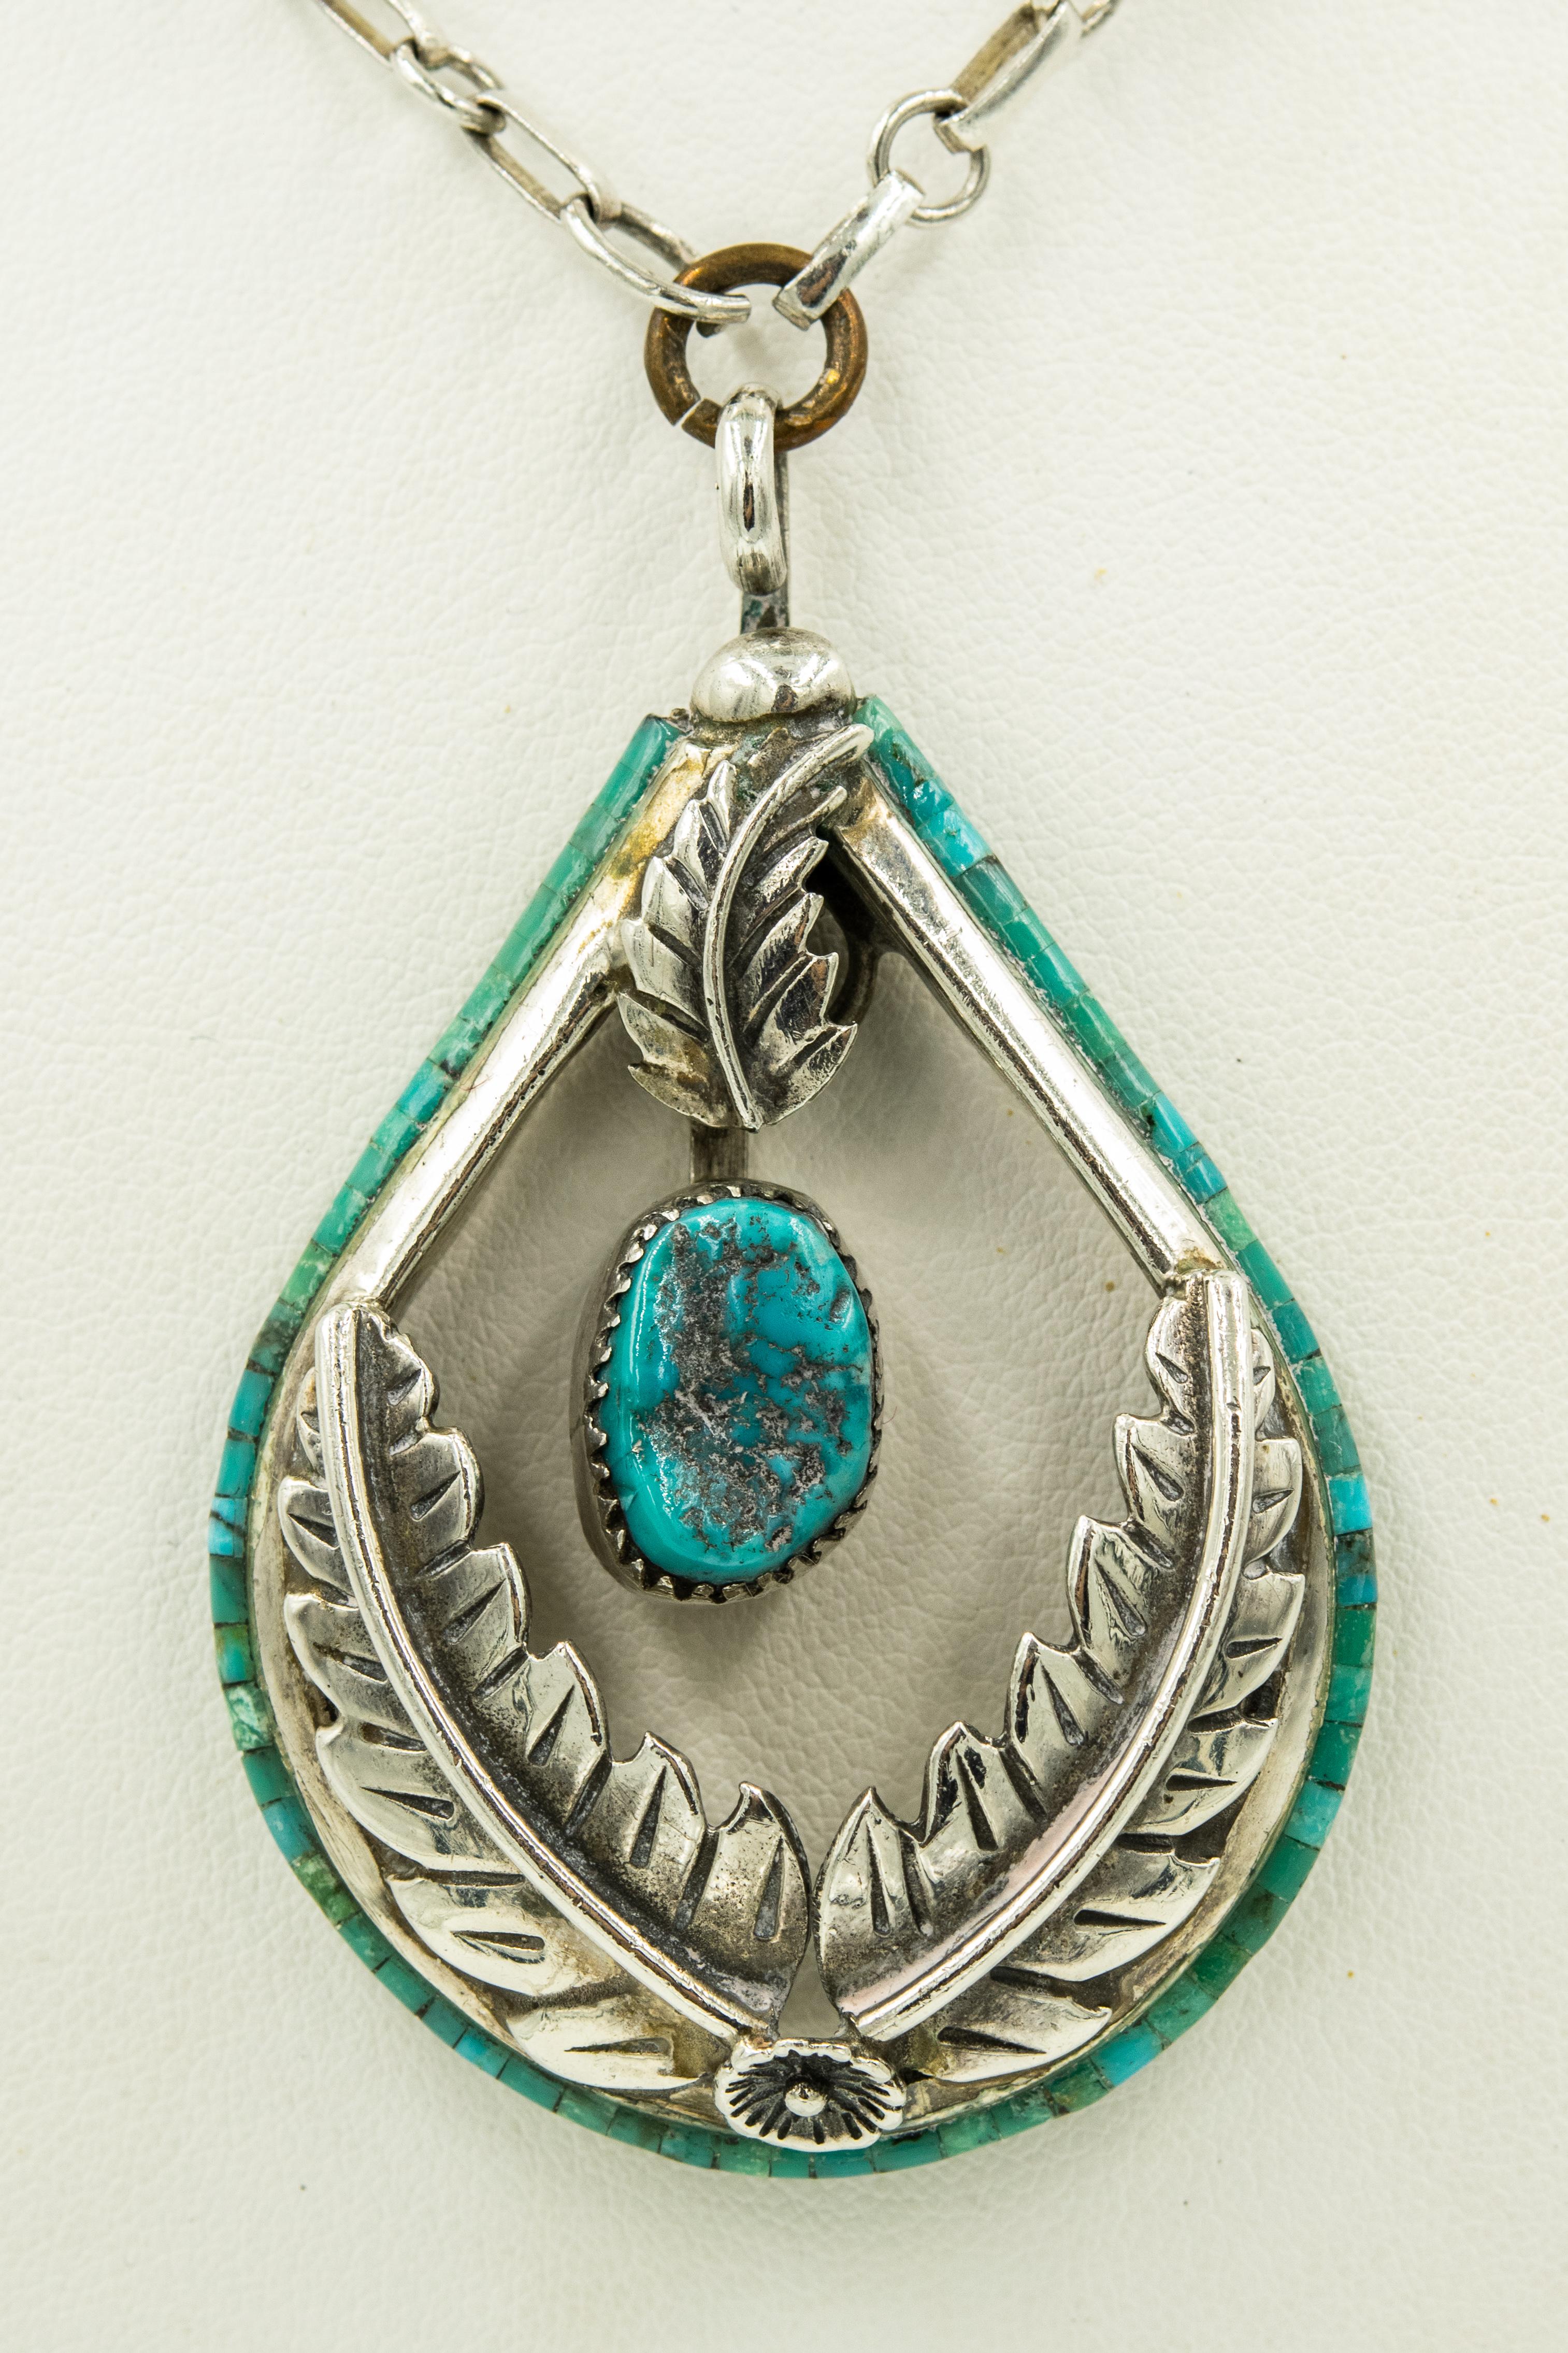 Native American sterling silver collar with two rows of  tightly strung turquoise beads between three rows of twisted ropes.  From the collar, dangles a matching with sterling and turquoise teardrop dangling pendant with a silver flower and leaf